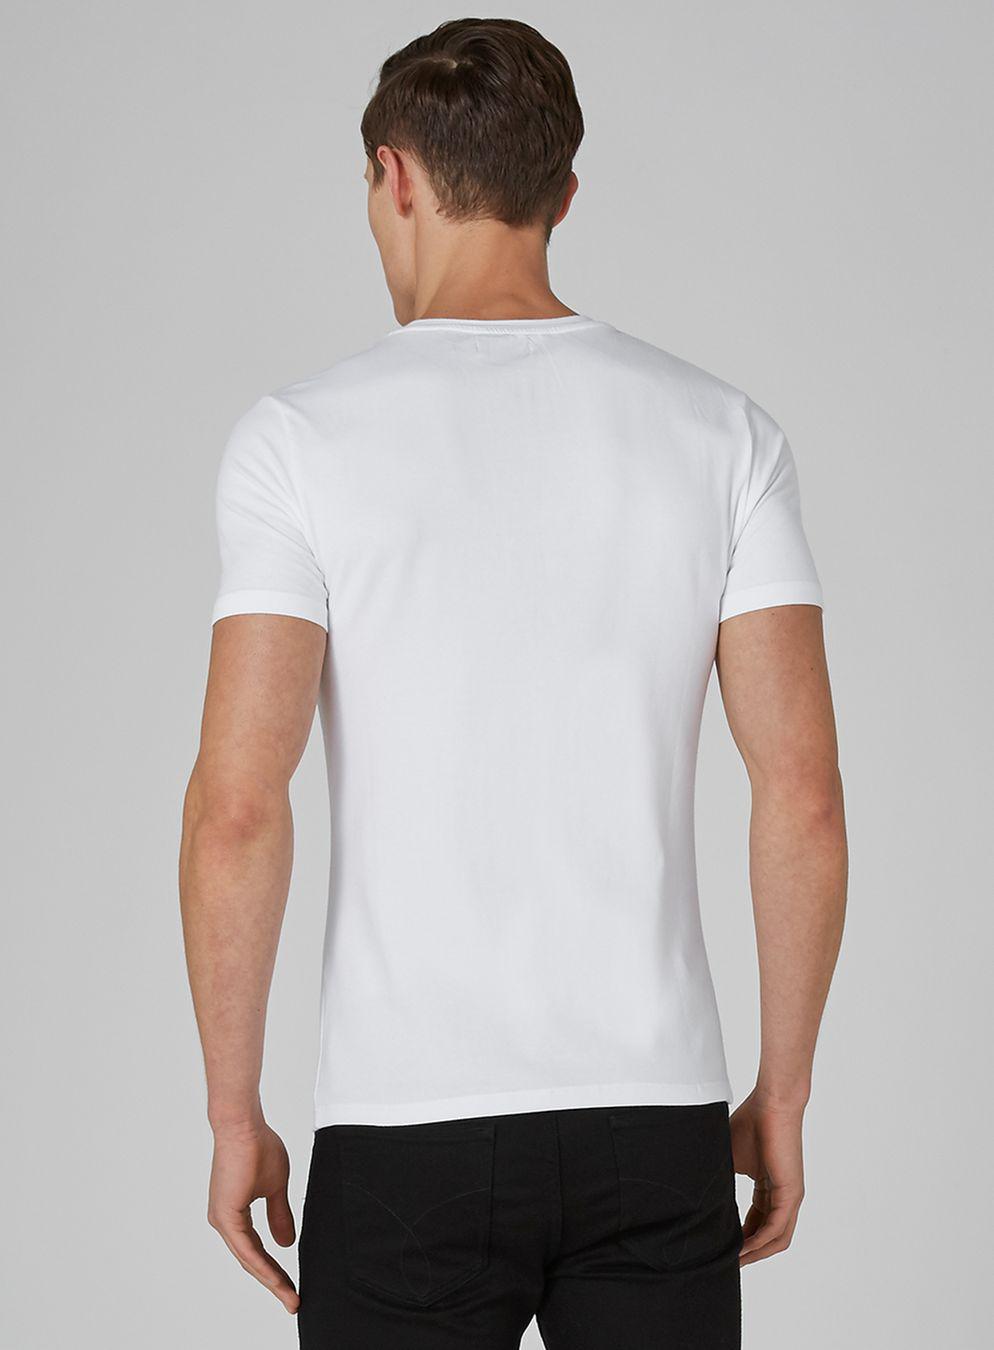 TOPMAN White Ultra Muscle Fit T-shirt for Men - Lyst